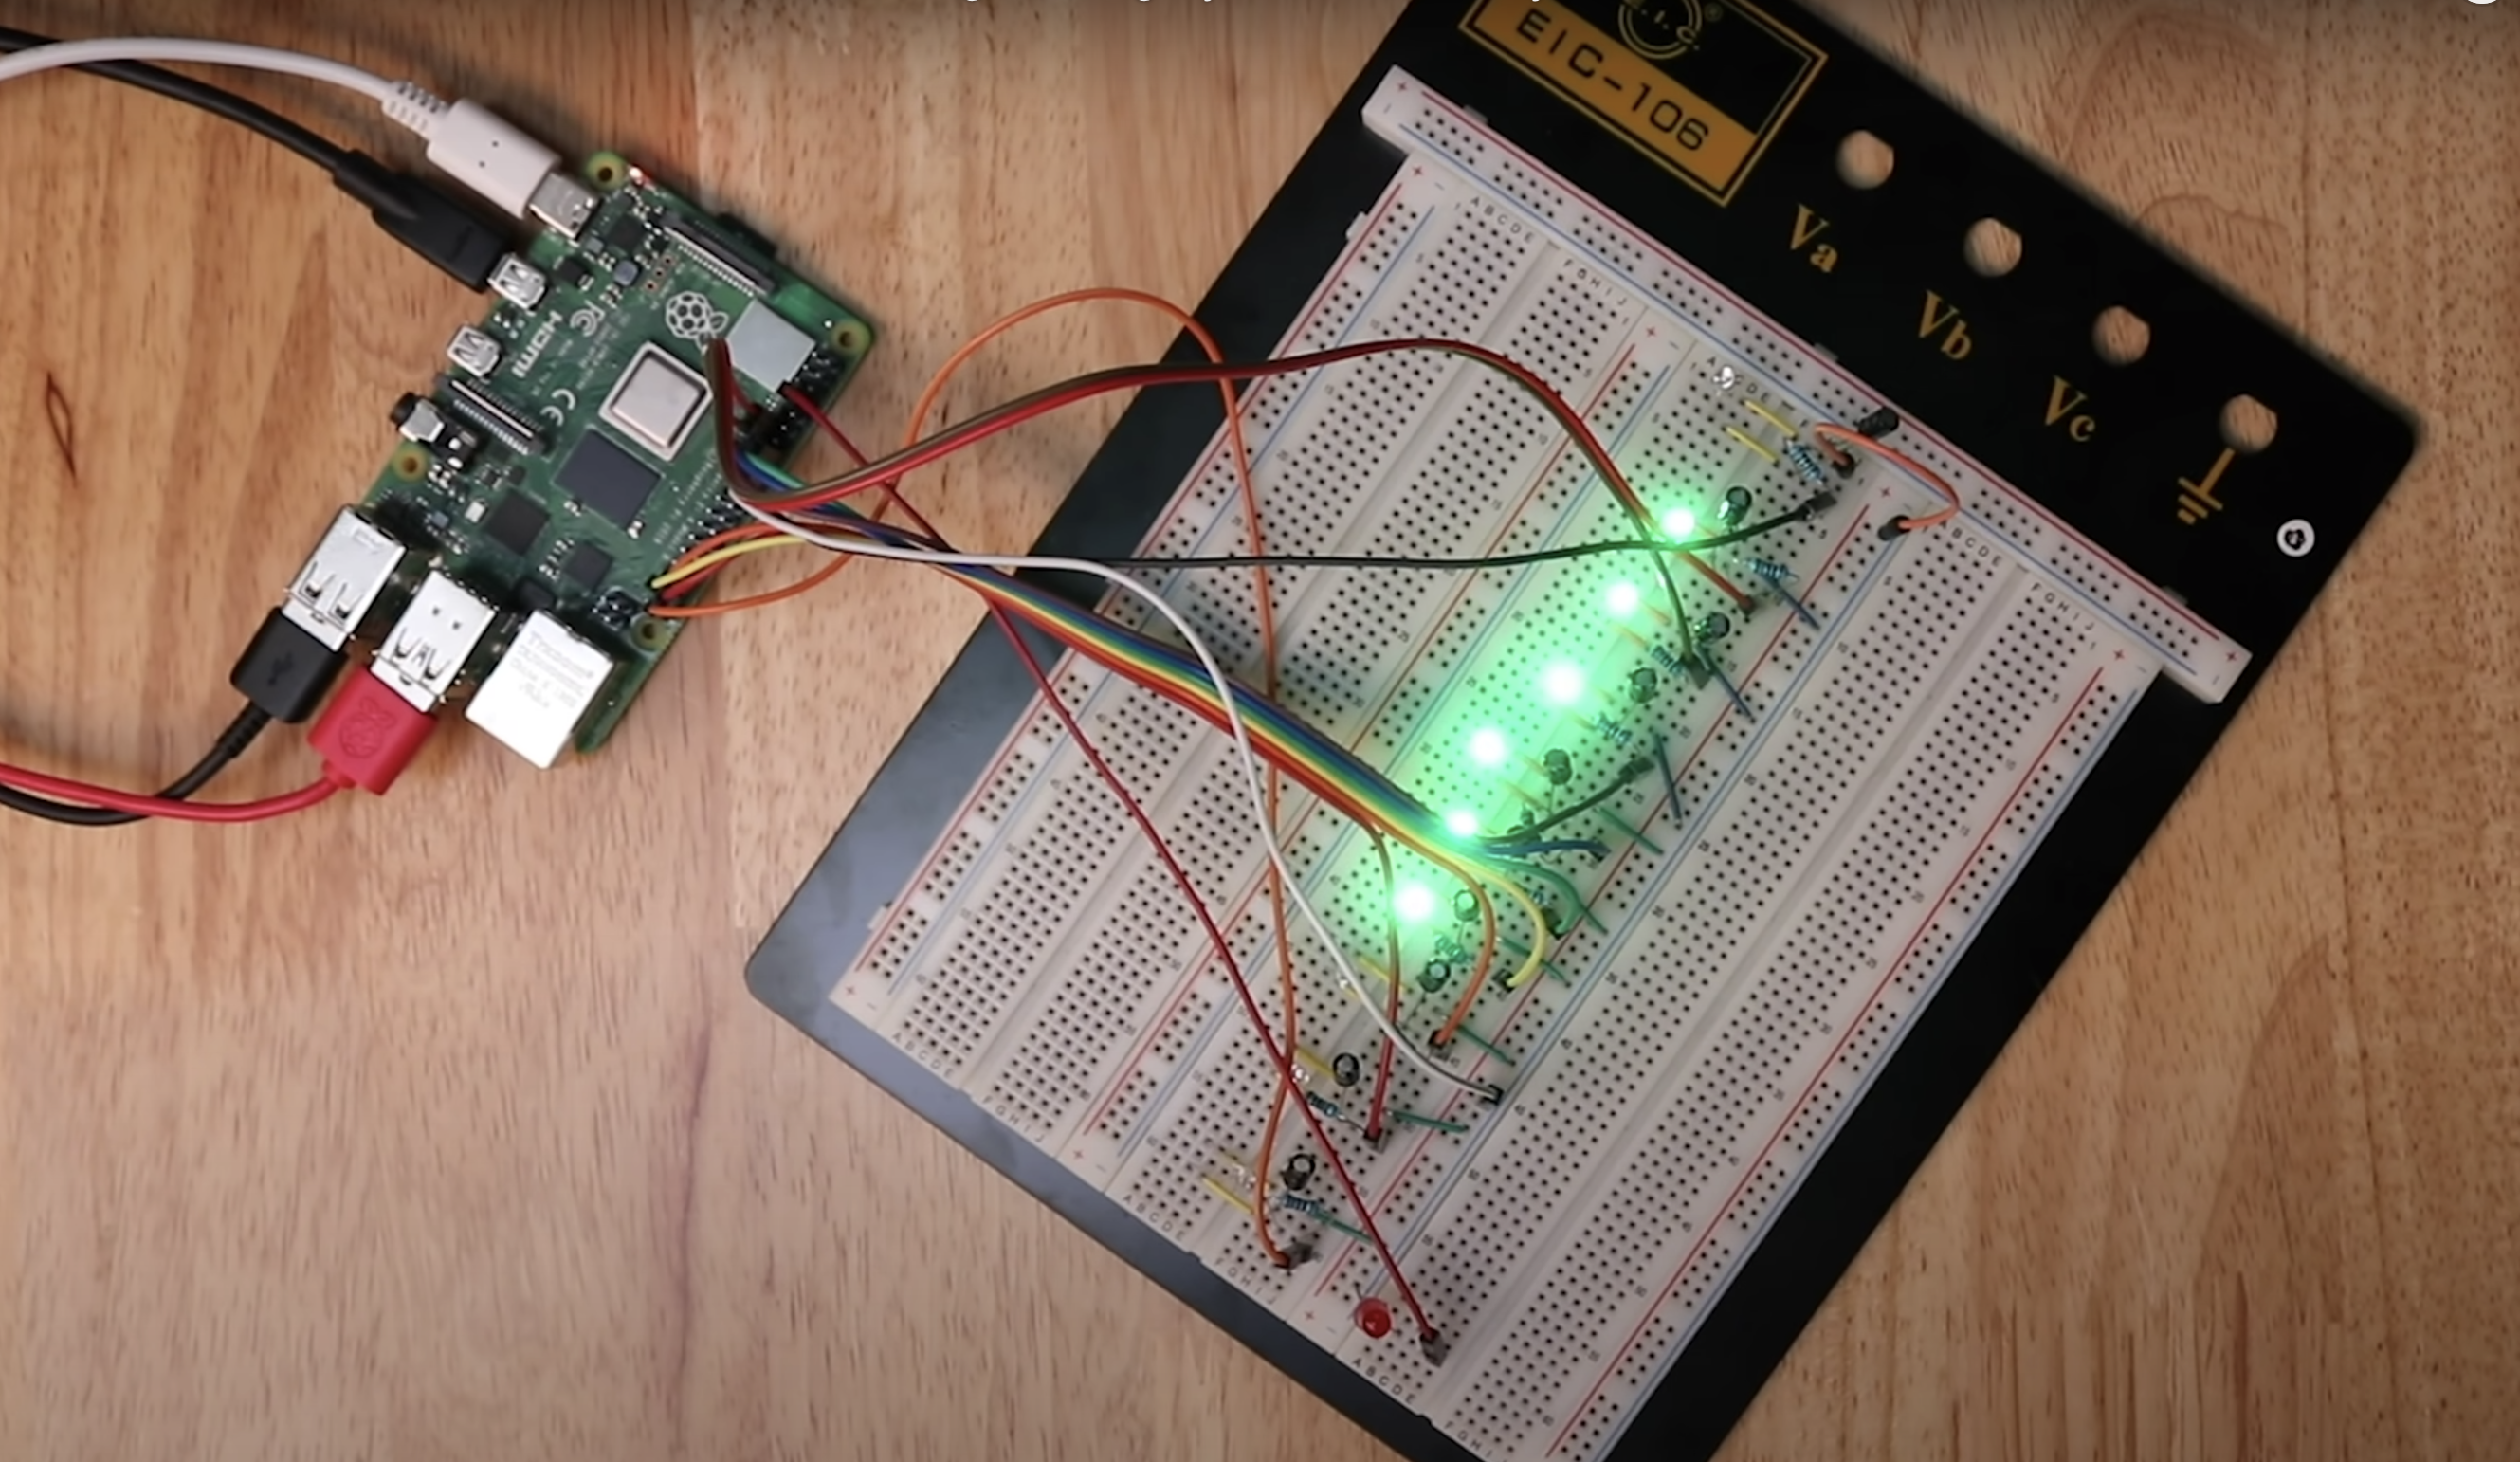 A breadboard for prototyping a. cryptocurrency music instrument.